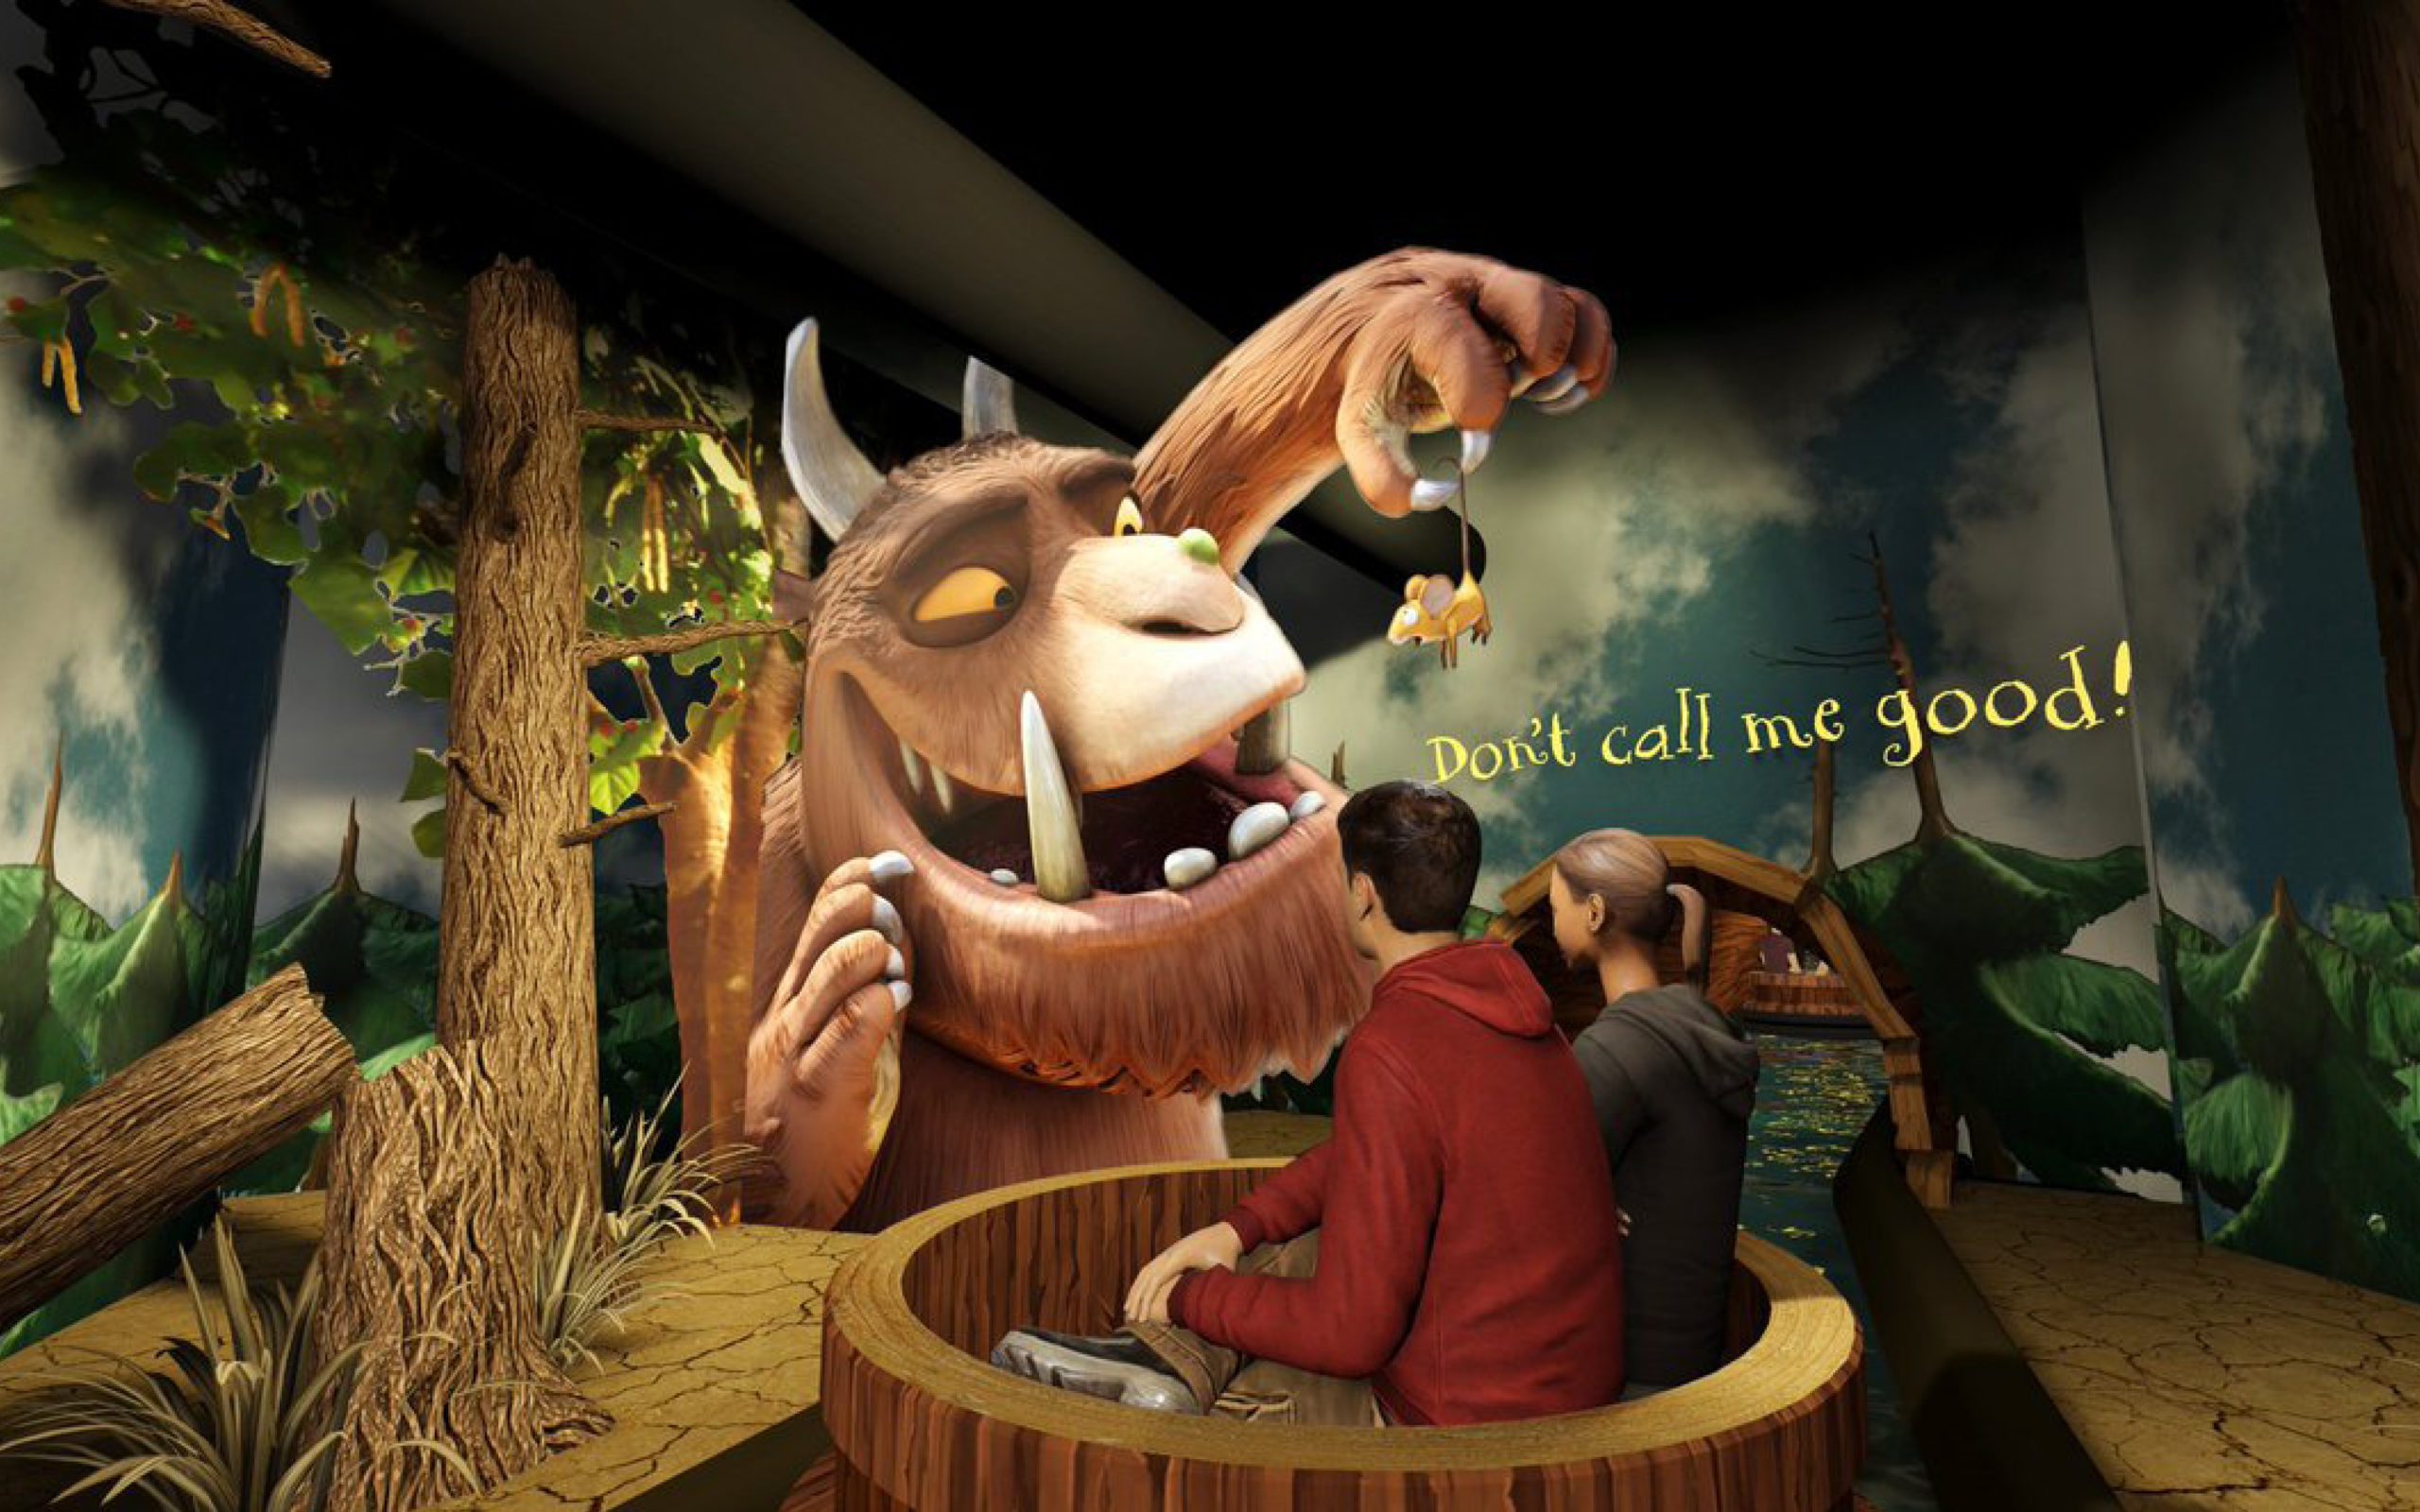 A concept image of The Gruffalo ride with 2 people in a boat